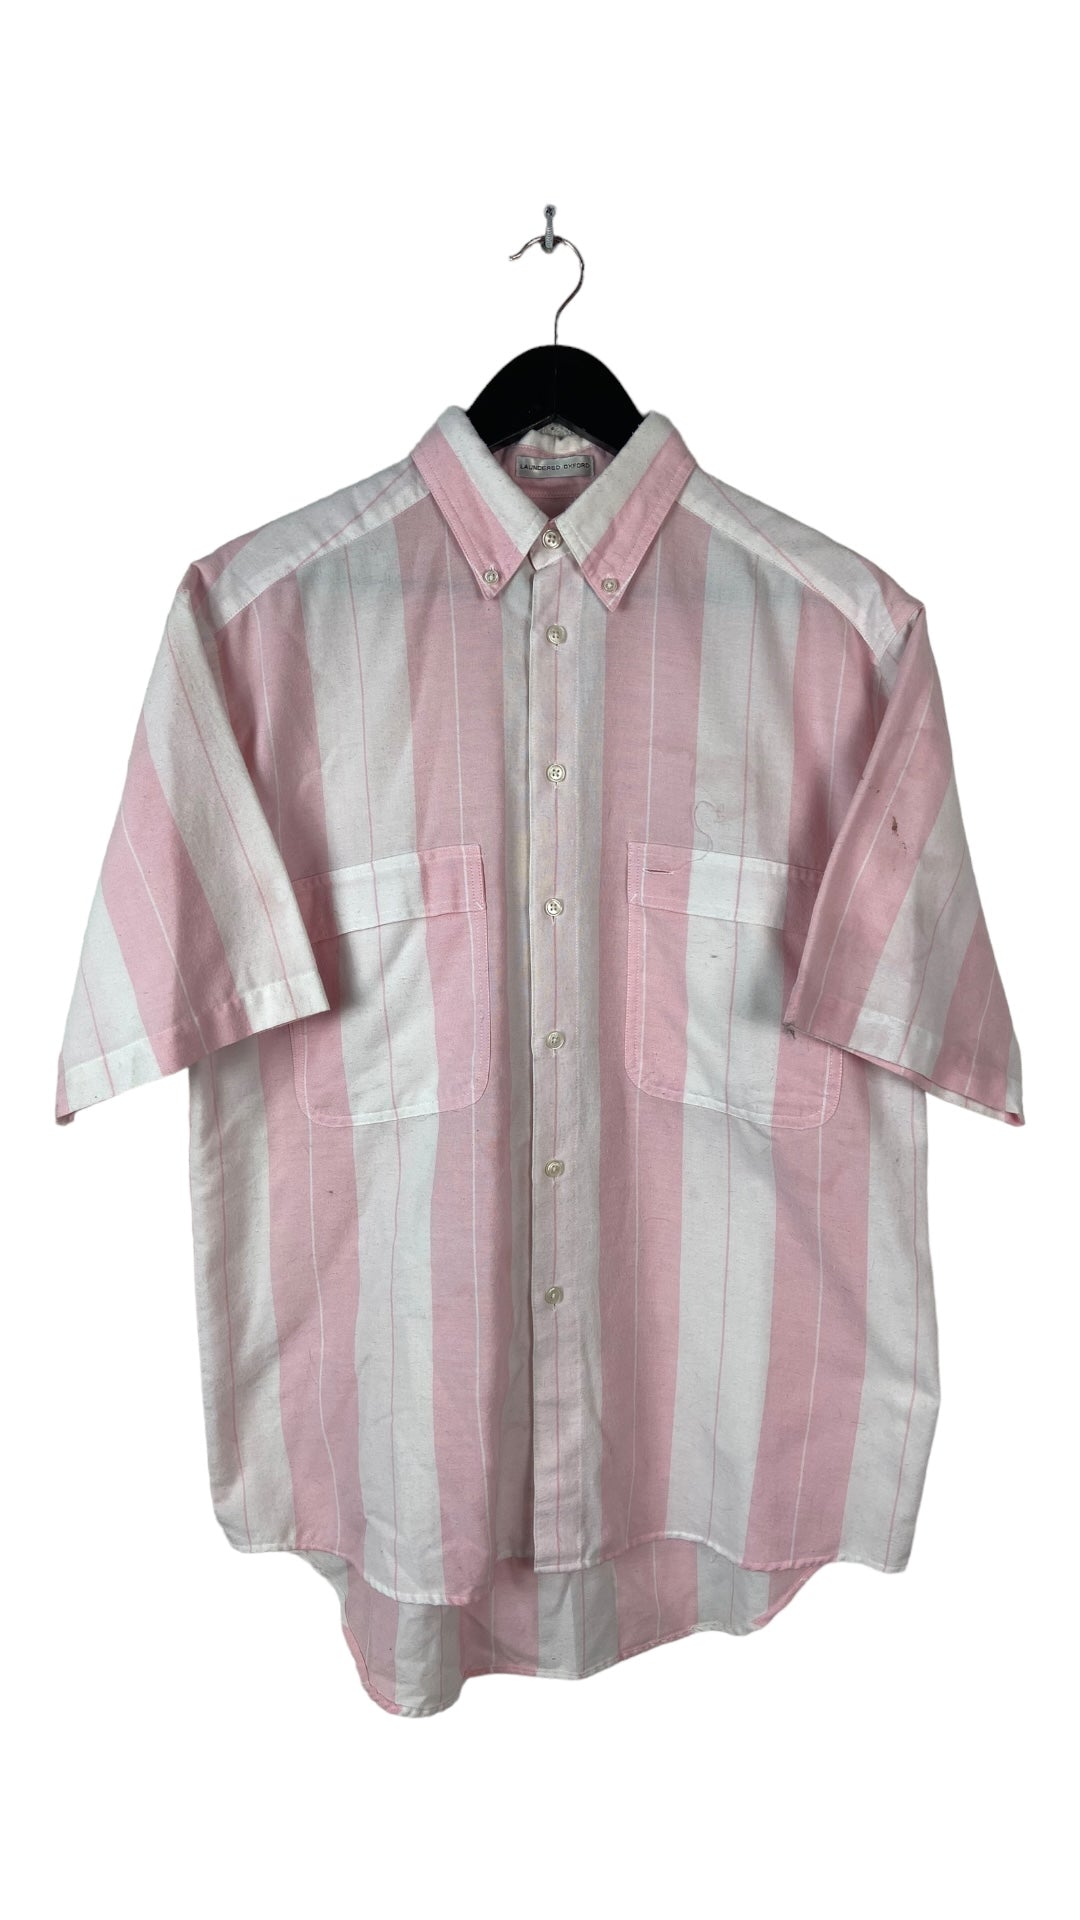 VTG Levi’s Laundered Oxford Short Sleeve Pink Button Up Shirt Sz M